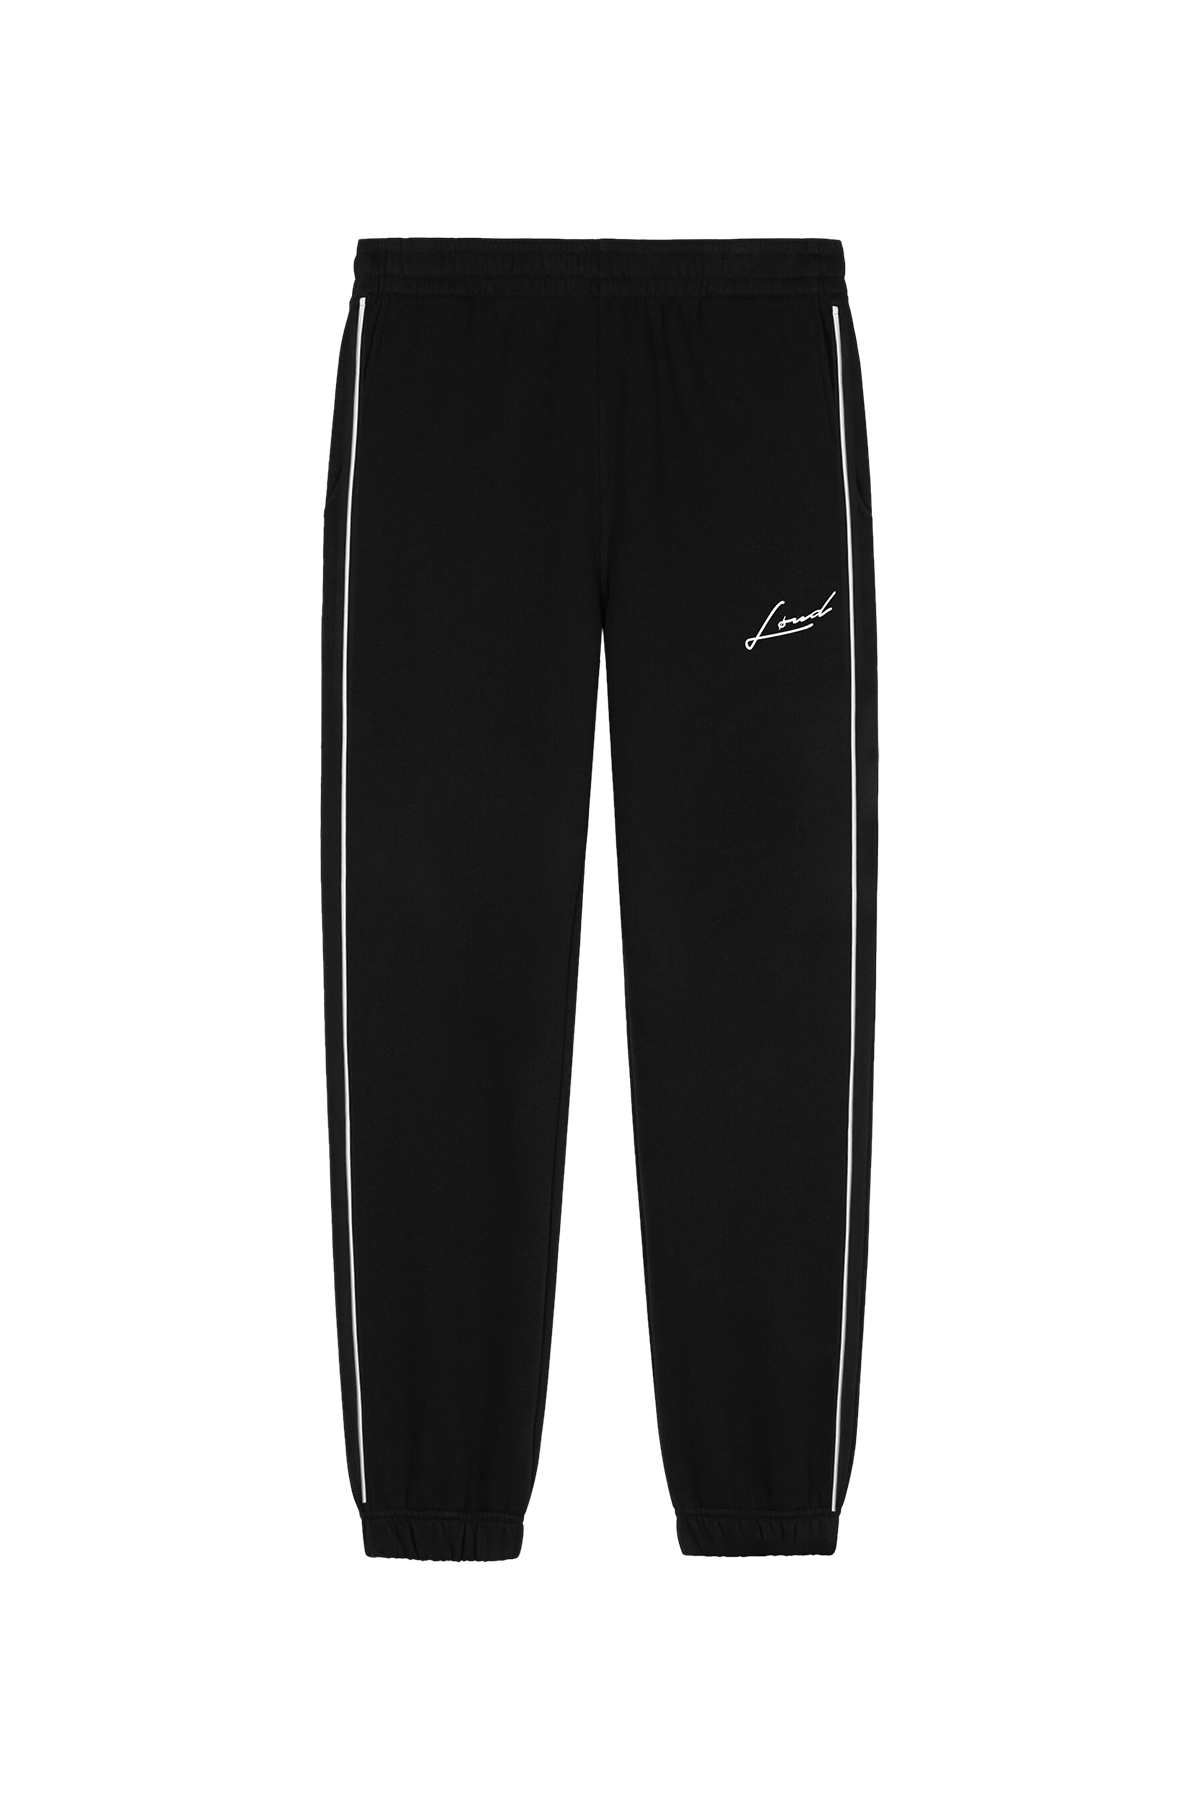 Loud Black with White Piping Tracksuit Joggers - Live Look Loud